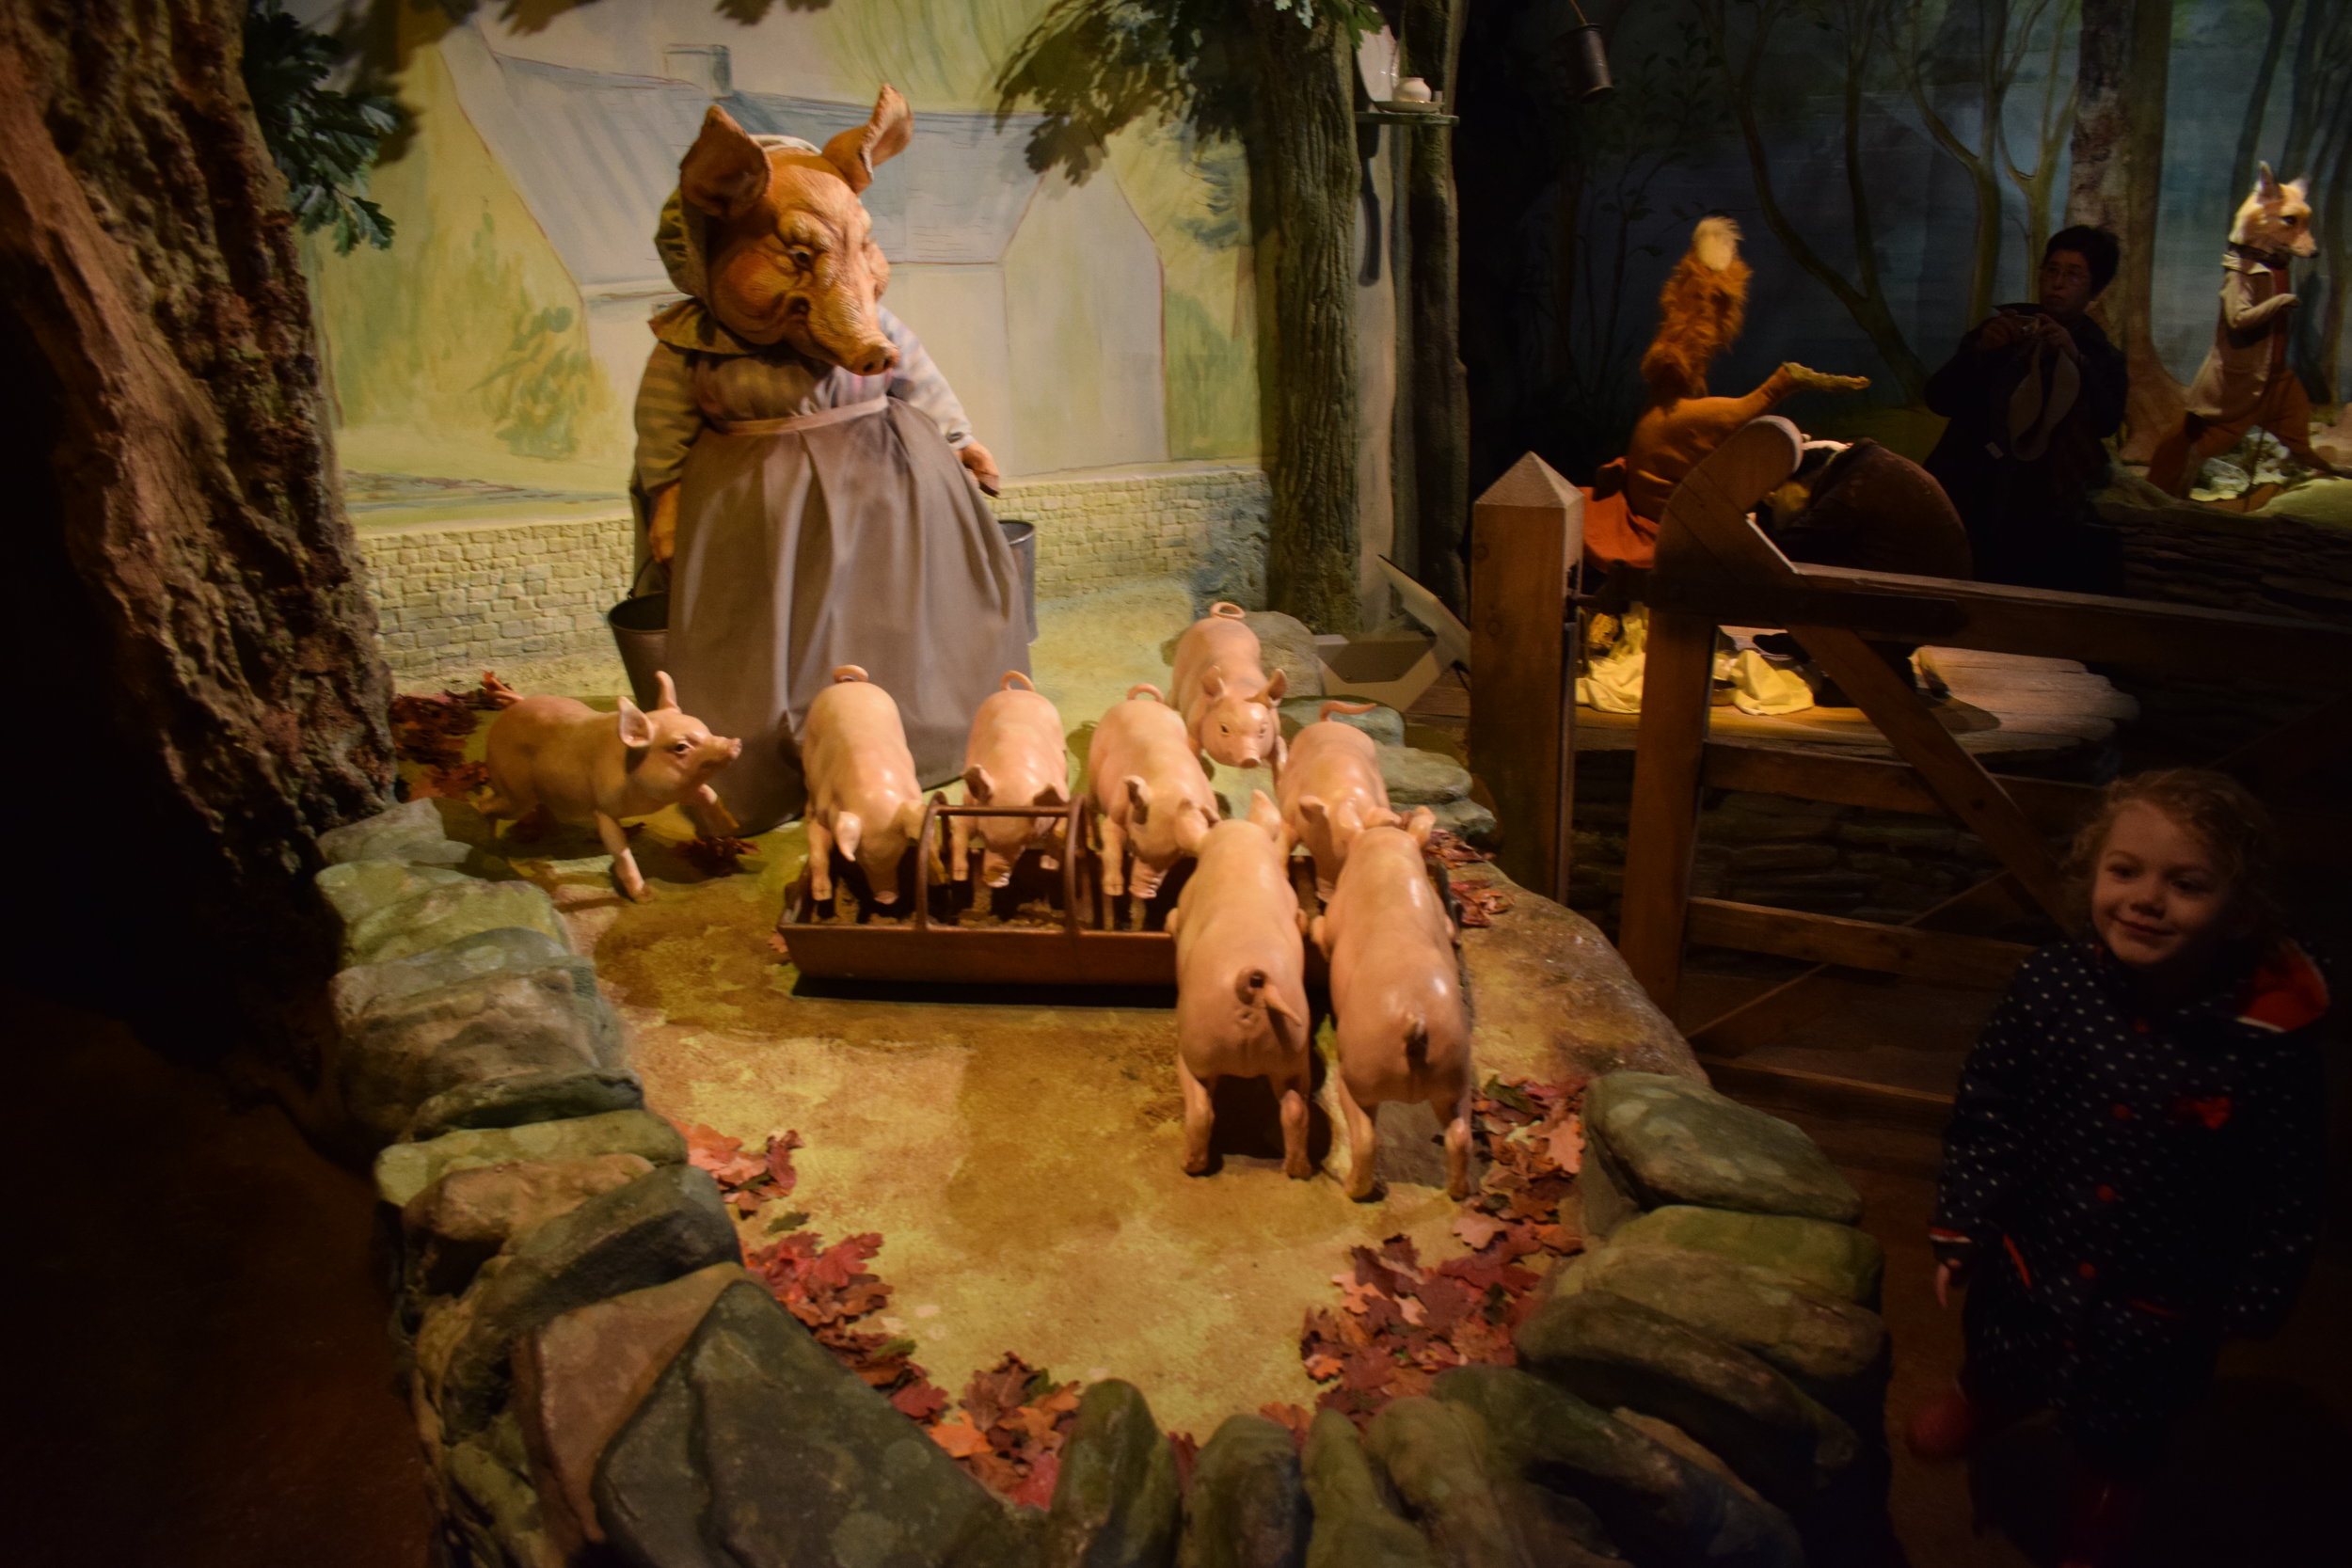 The World of Beatrix Potter Attraction